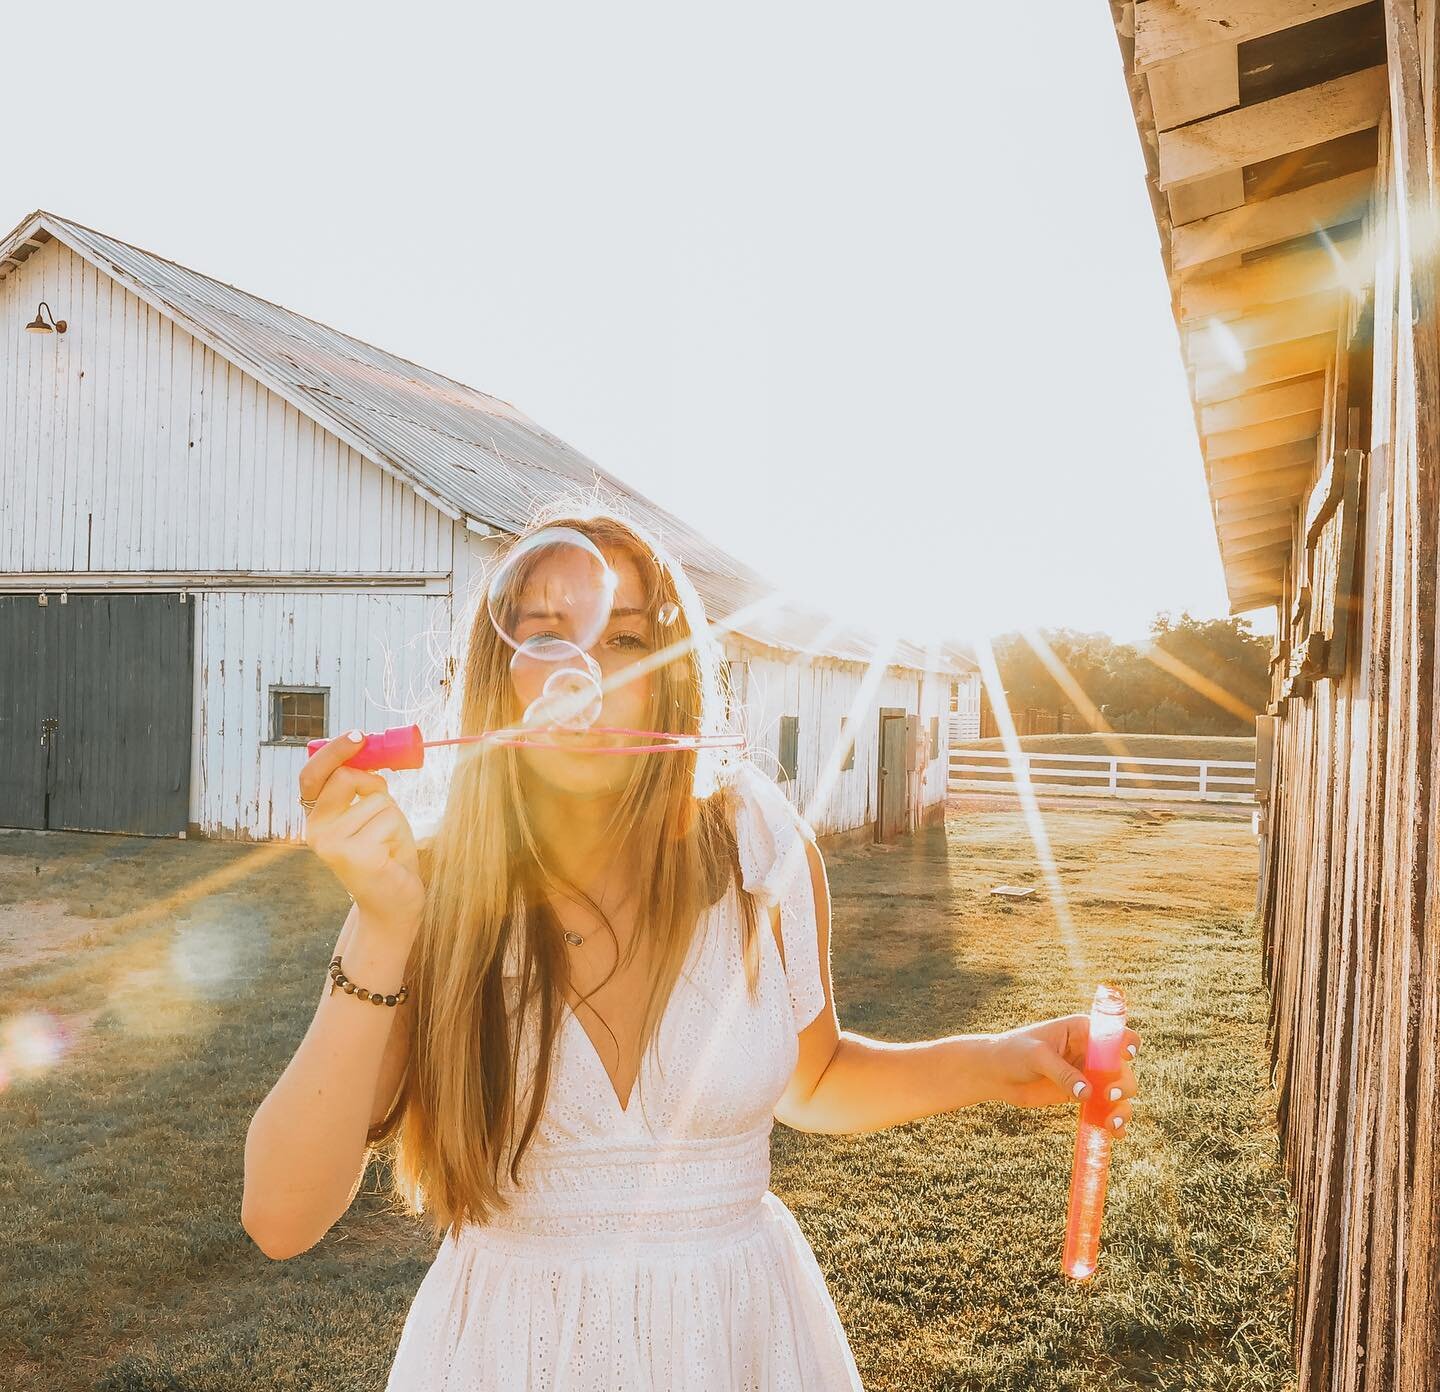 Sunshine and bubbles? Yes please! Two of my favorite things. During a photo session what is something you want to capture? 
❤️📷
#Childrenofinstagram#enchantedchildhood#illuminatechildhood#thehonestlens#celebrate_childhood#themagicofchildhood#pixel_k